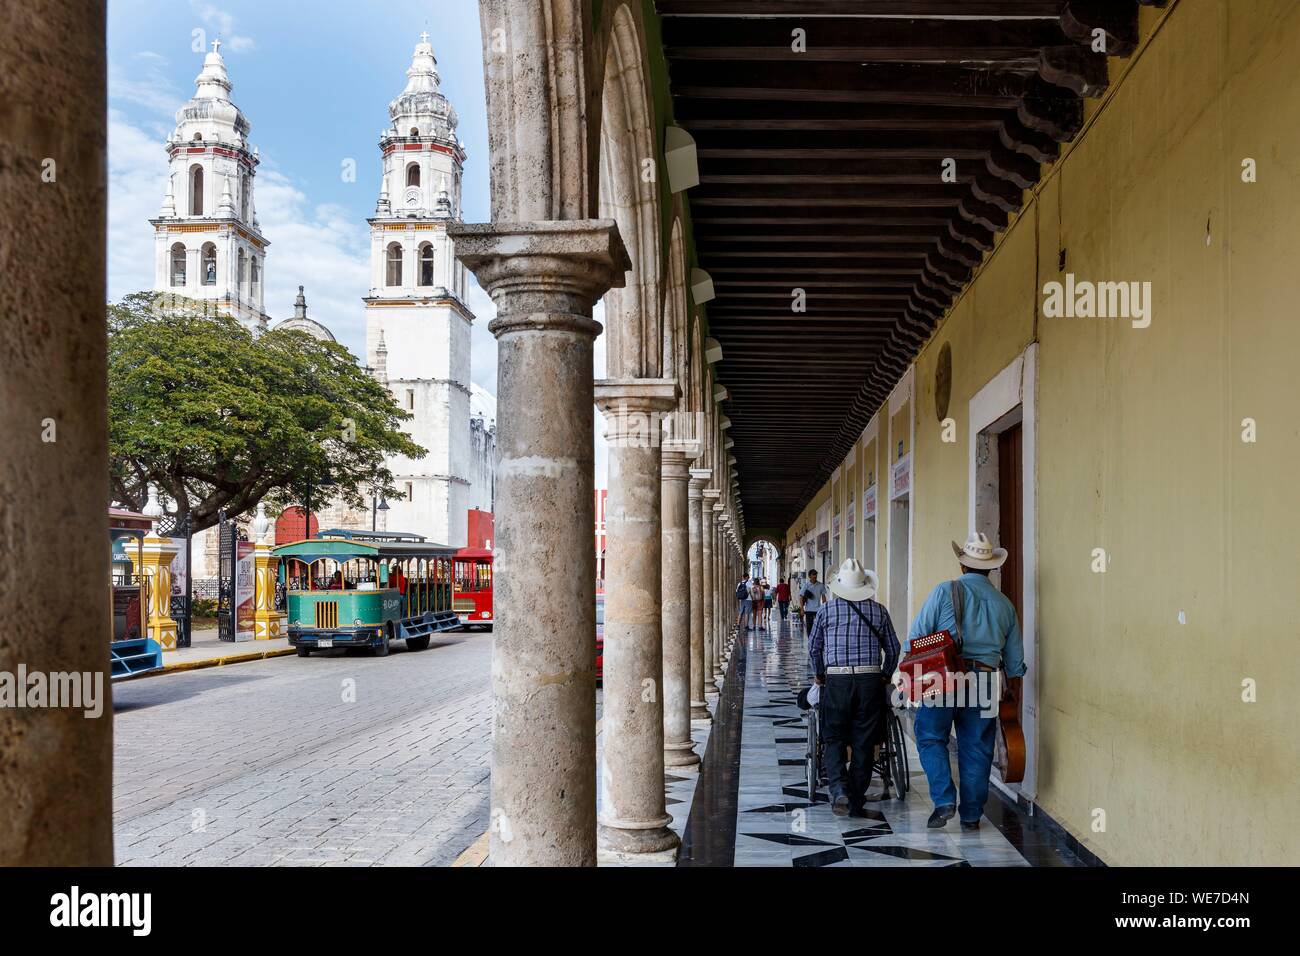 Mexico, Campeche state, Campeche, fortified city listed as World Heritage by UNESCO, the arcades and Nuestra Senora de la Purisima Concepcion cathedral Stock Photo